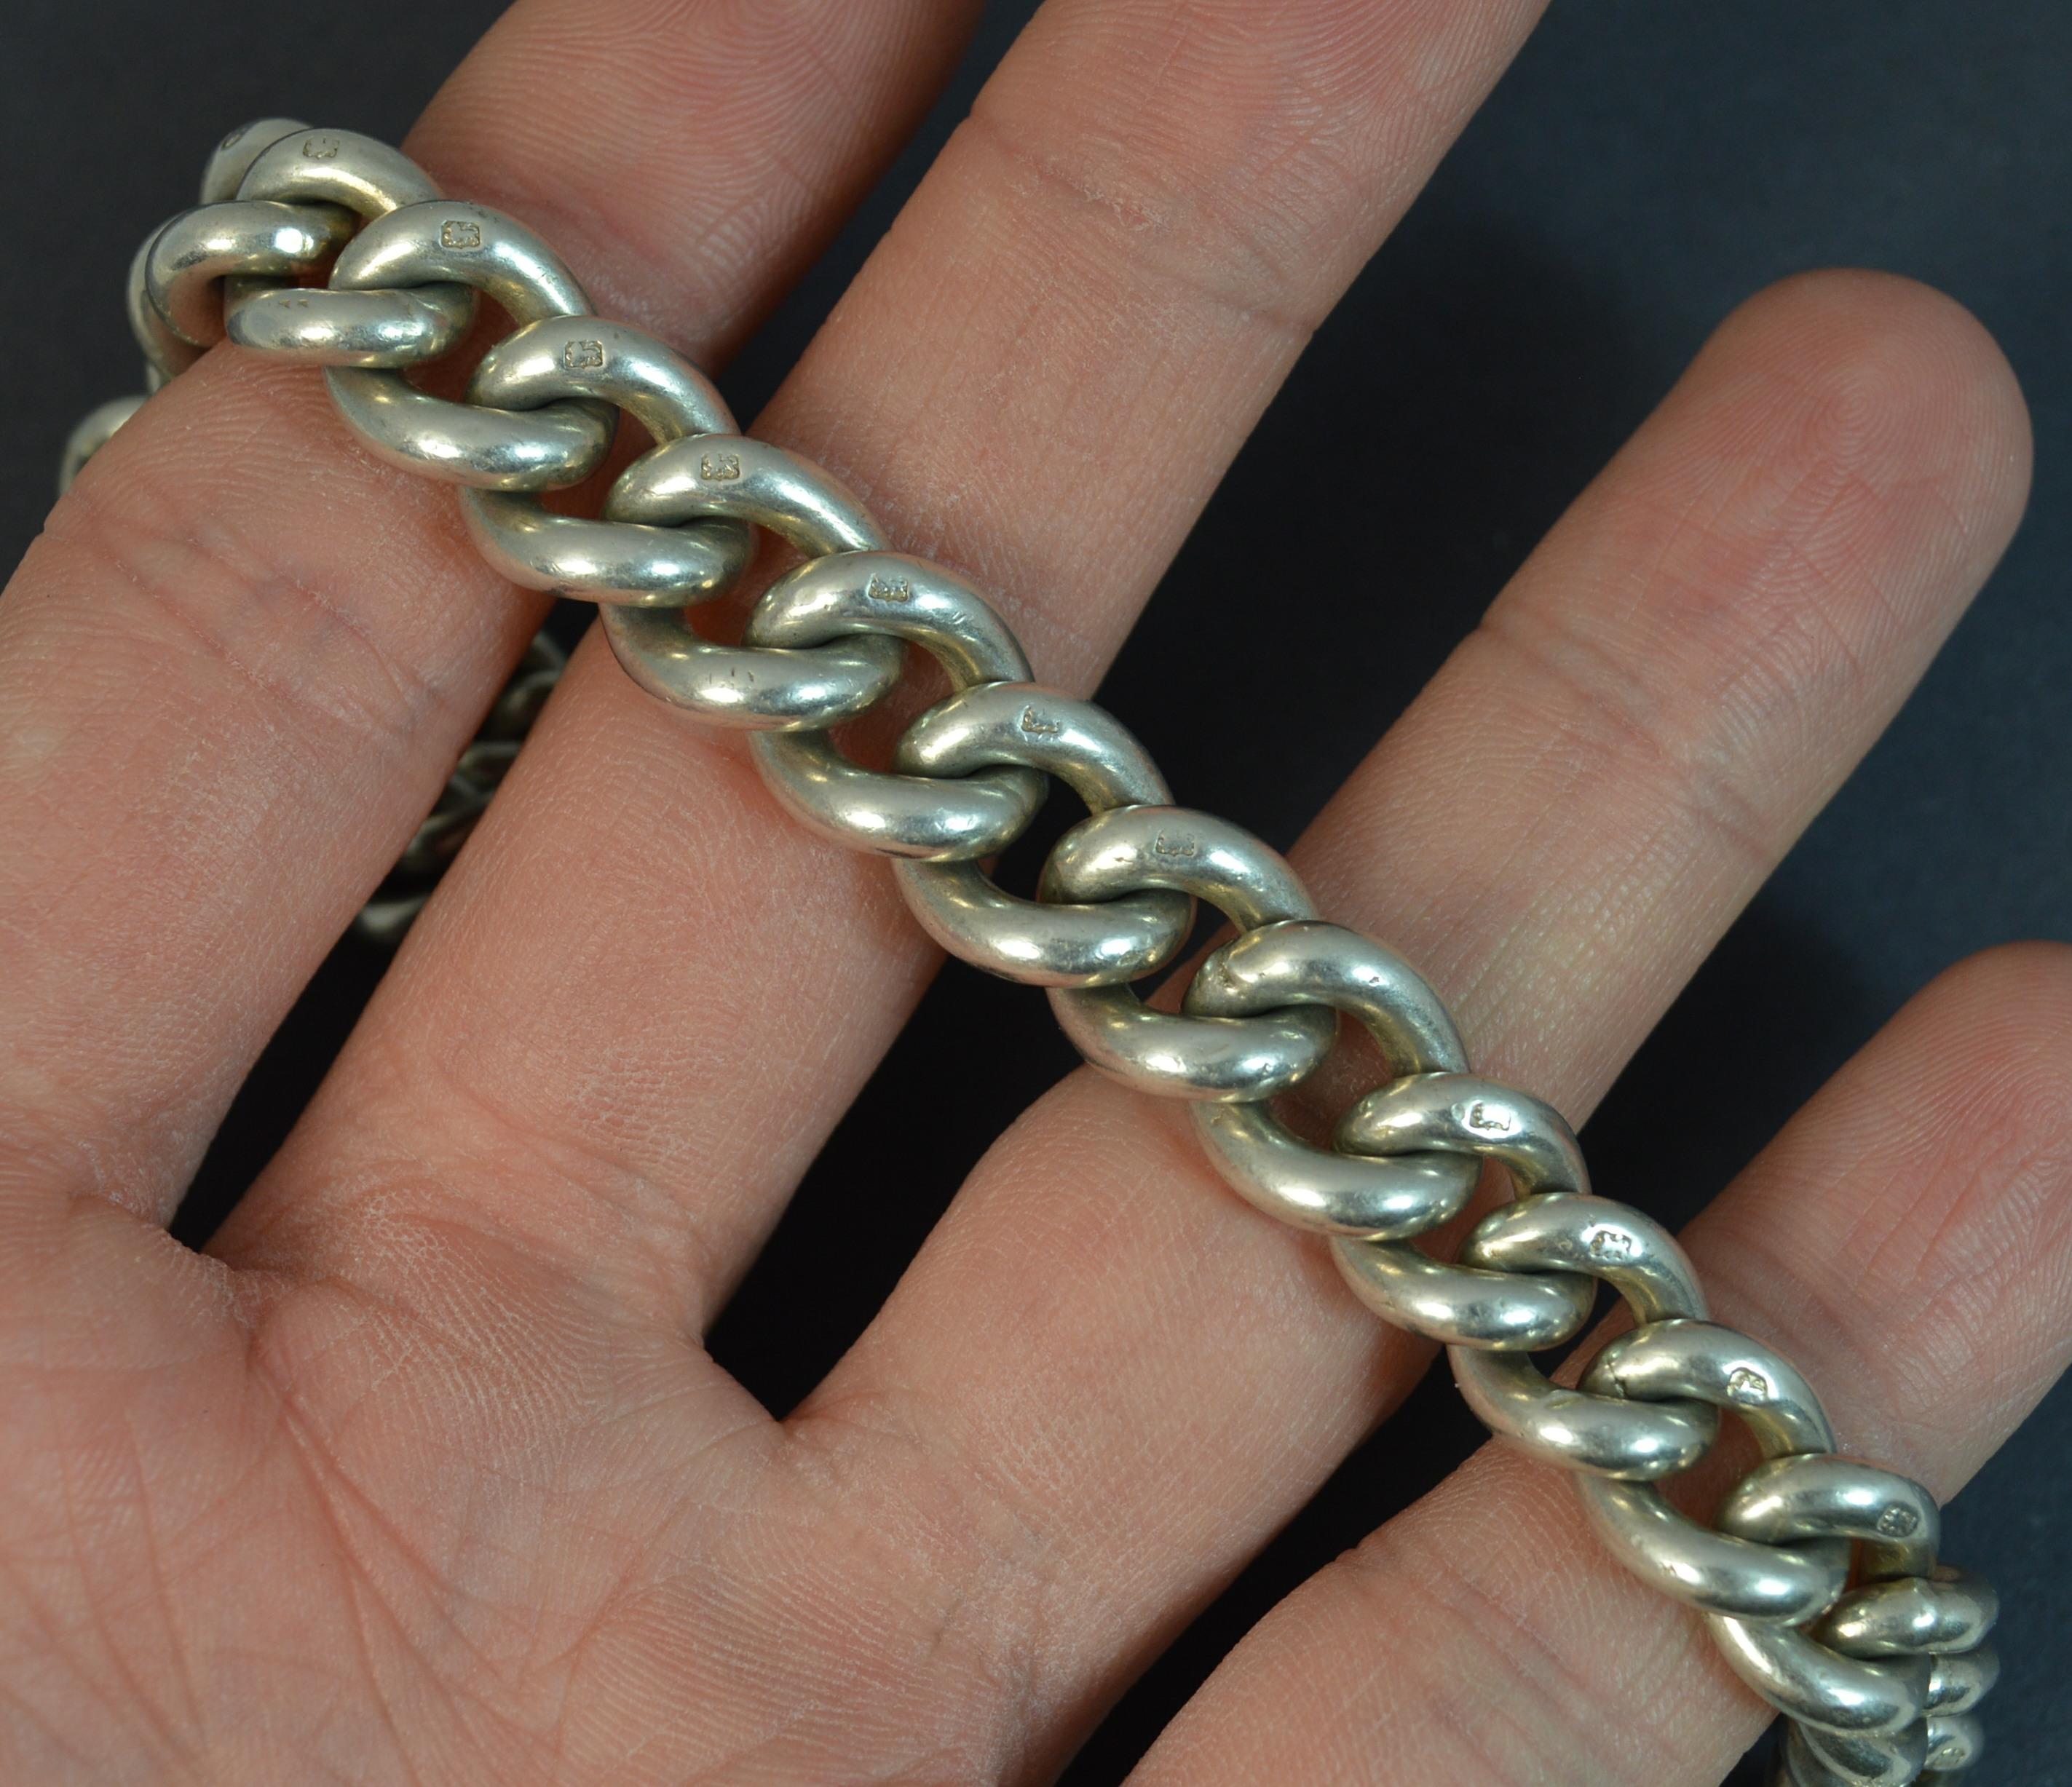 A sterling silver English made albert pocket watch chain. Good gauge of silver, crisp and chunky links of graduated sized links. Single albert design. Complete with tbar and replacement working clasp.
CONDITION ; Very good. Solid links. Working